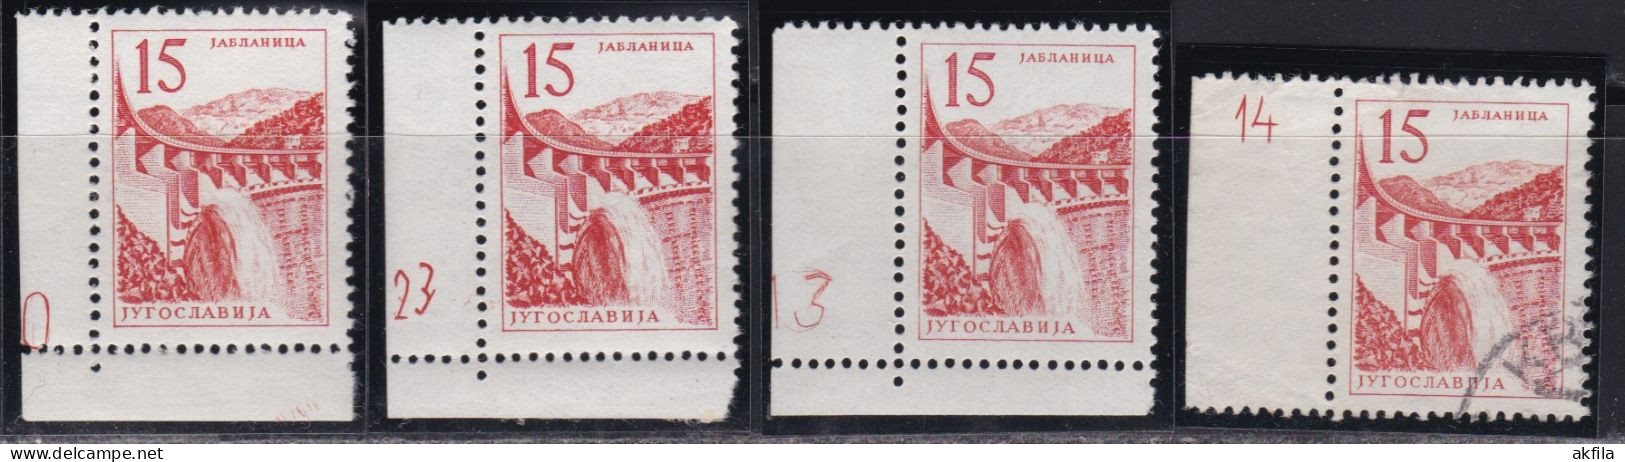 Yugoslavia 1958 Definitive Stamps With Printing Plate Markings, MNH And Used Michel 857. - Oblitérés